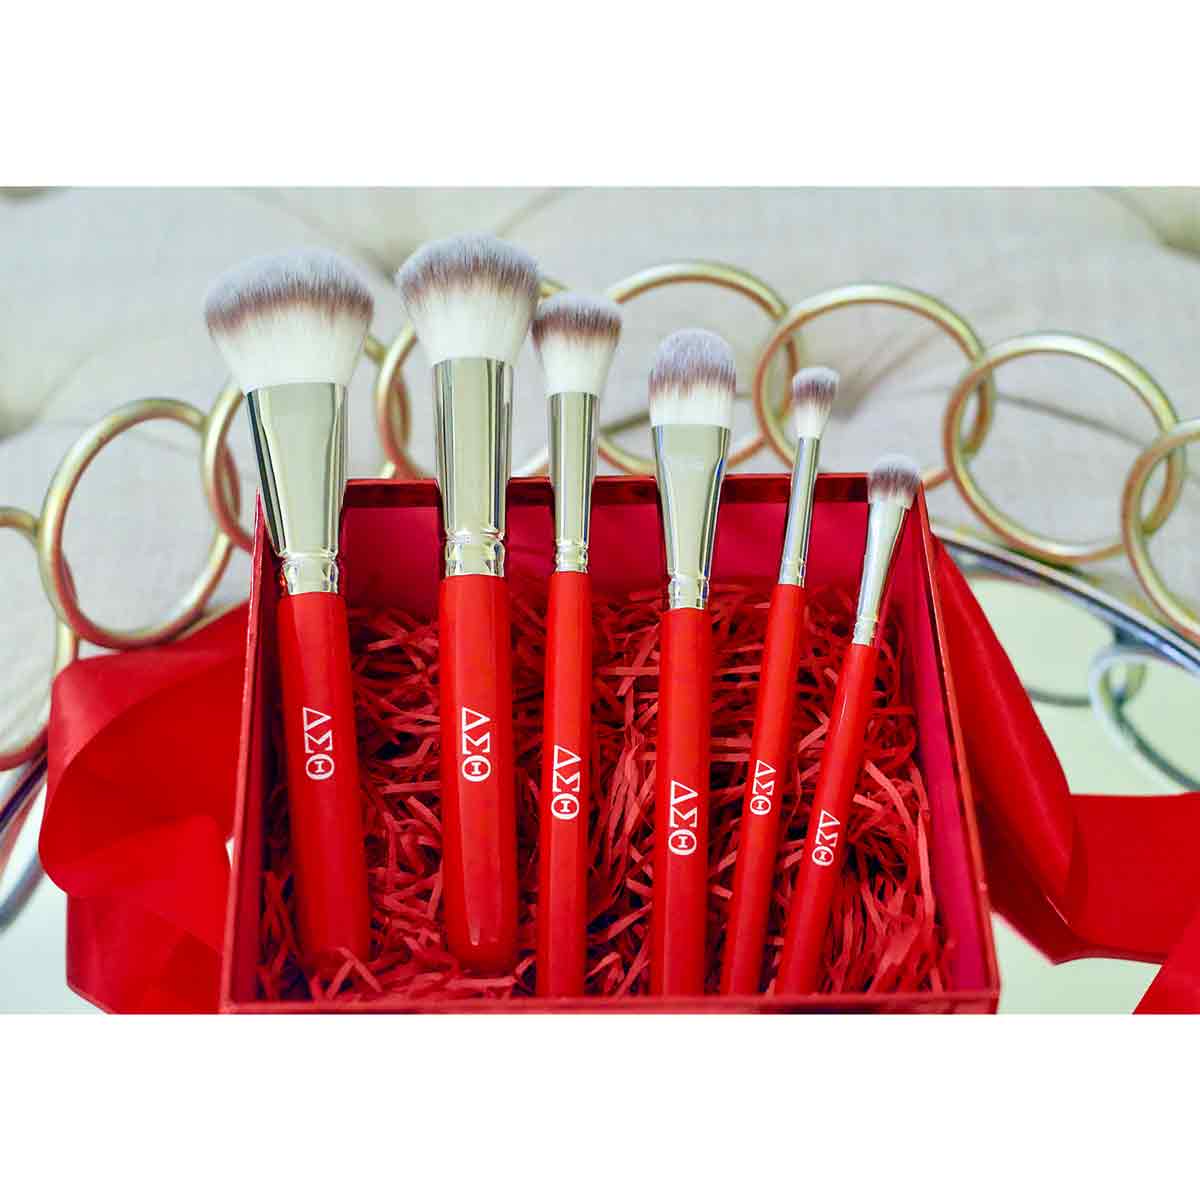 Includes:  1. Deluxe Powder Brush  2. Rounded Buffing Brush  3. Flawless Foundation Brush  4. Luxe Highlighter & Blush Brush  5. Concealer Brush  6. Eyeshadow Blender Brush  The Crimson & Cream Brush Set is a very special 6 piece professional brush set 